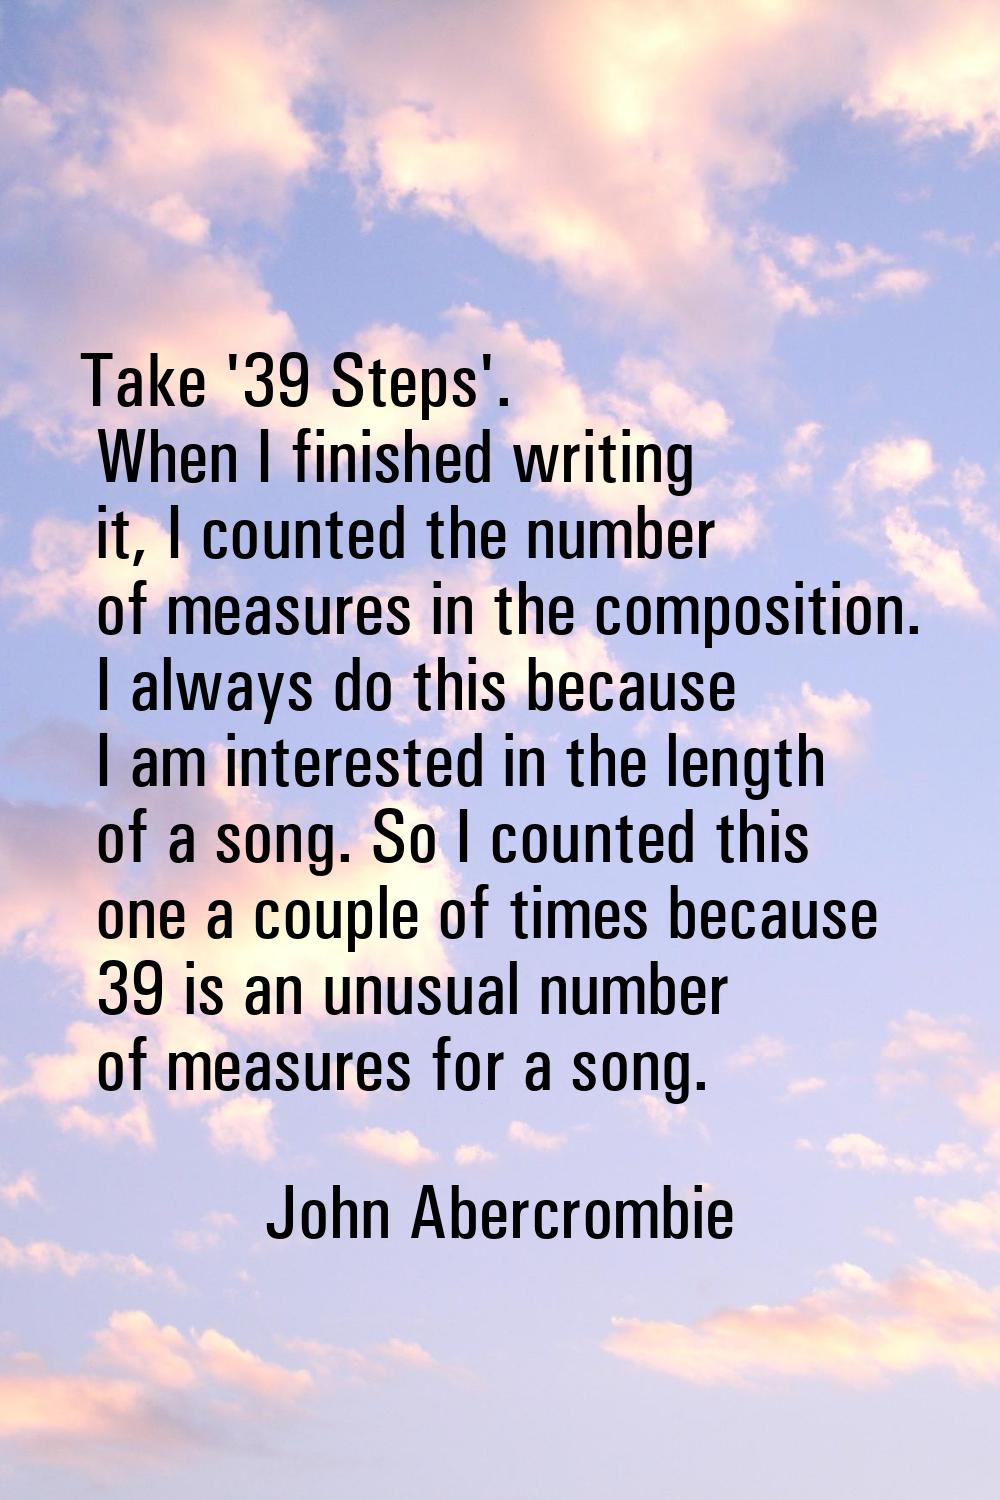 Take '39 Steps'. When I finished writing it, I counted the number of measures in the composition. I